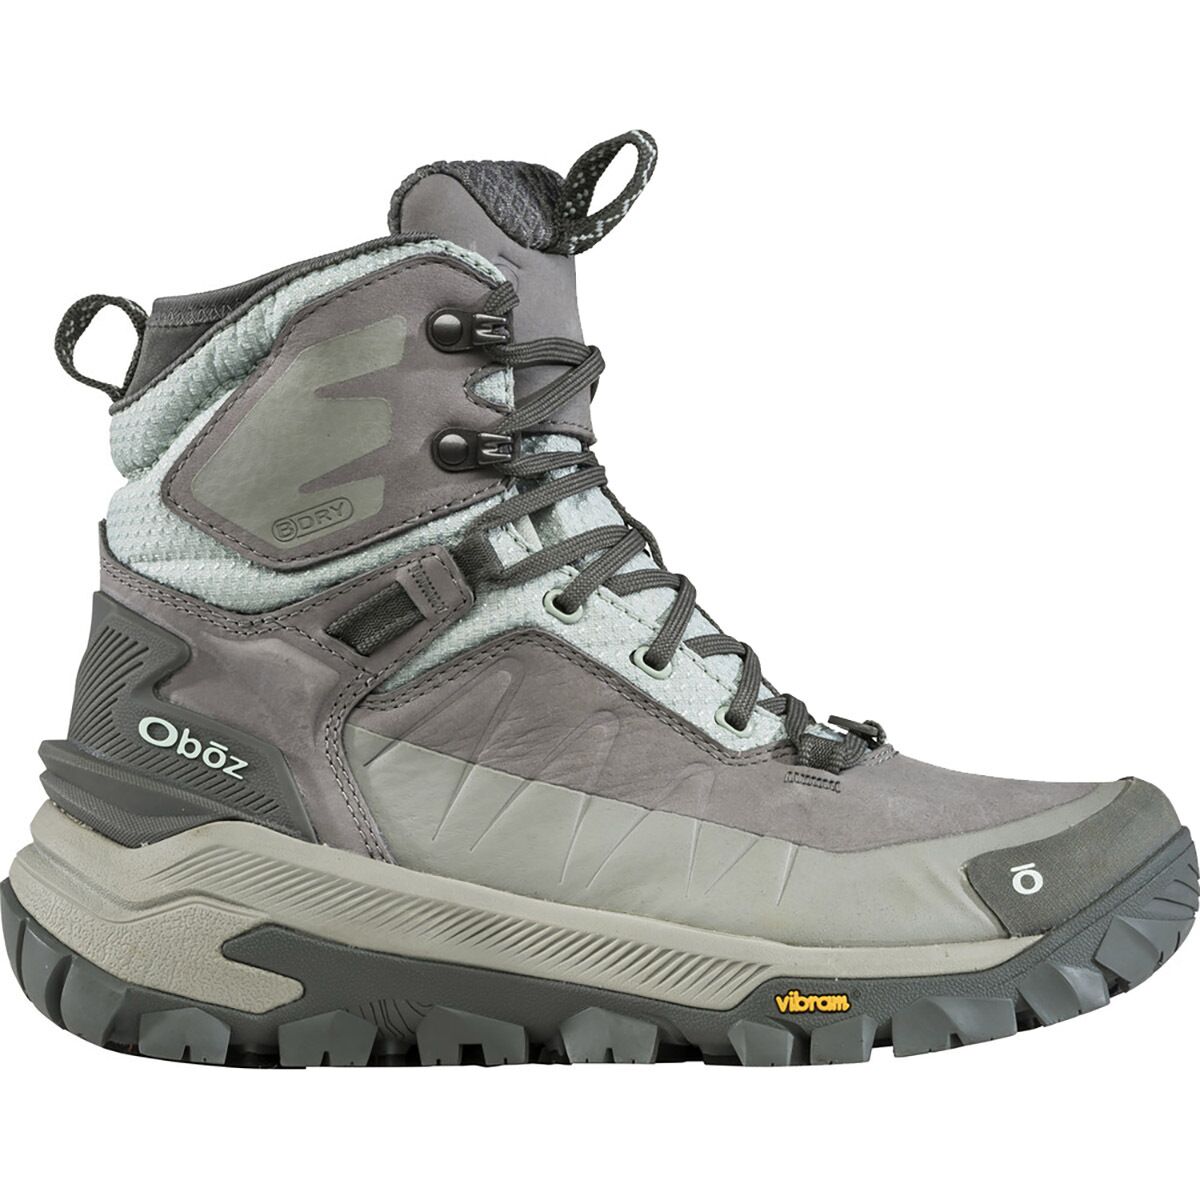 Oboz Bangtail Mid Insulated B-DRY Boot - Women's